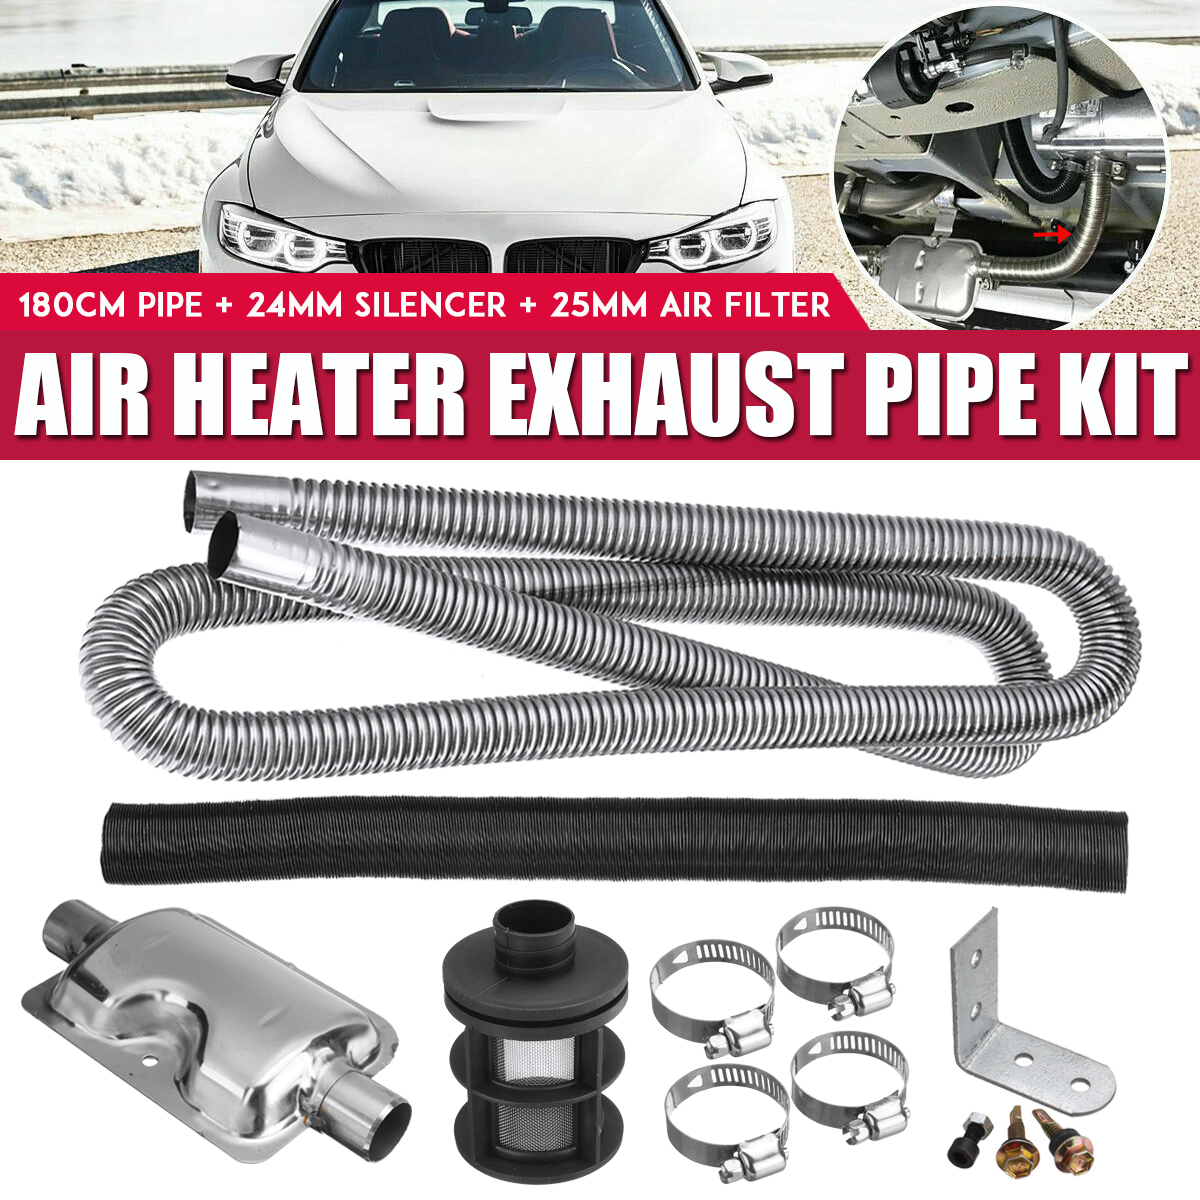 Stainless-Exhaust-Muffler-Silencer-Clamps-Bracket-Gas-Vent-Hose-Portable-180cm-Pipe-Silence-For-Air--1695770-2